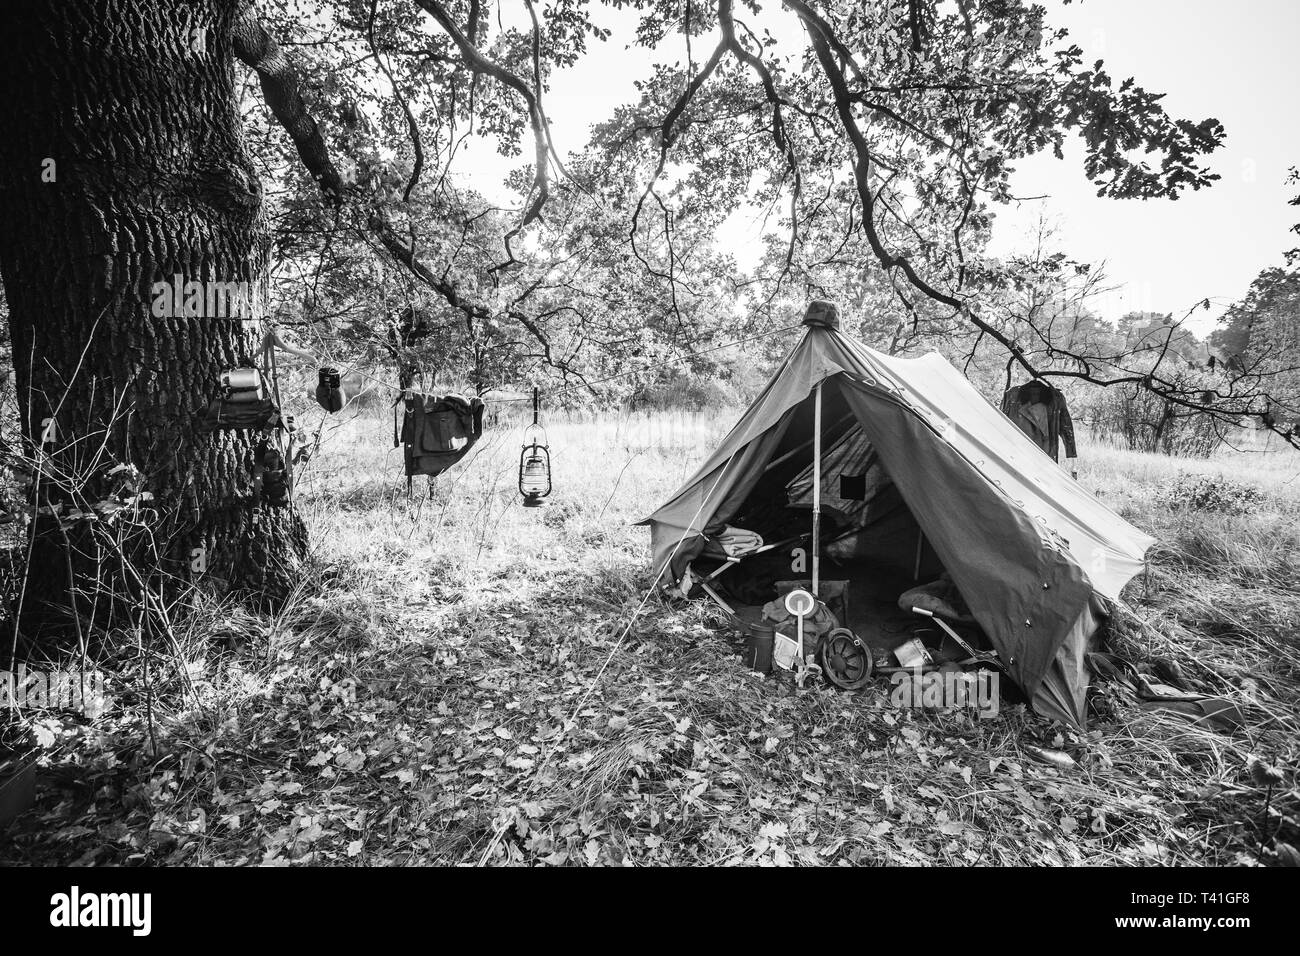 World War II German Wehrmacht Infantry Tent In Forest Camp. WWII WW2 German Ammunition. Photo In Black And White Colors. Stock Photo